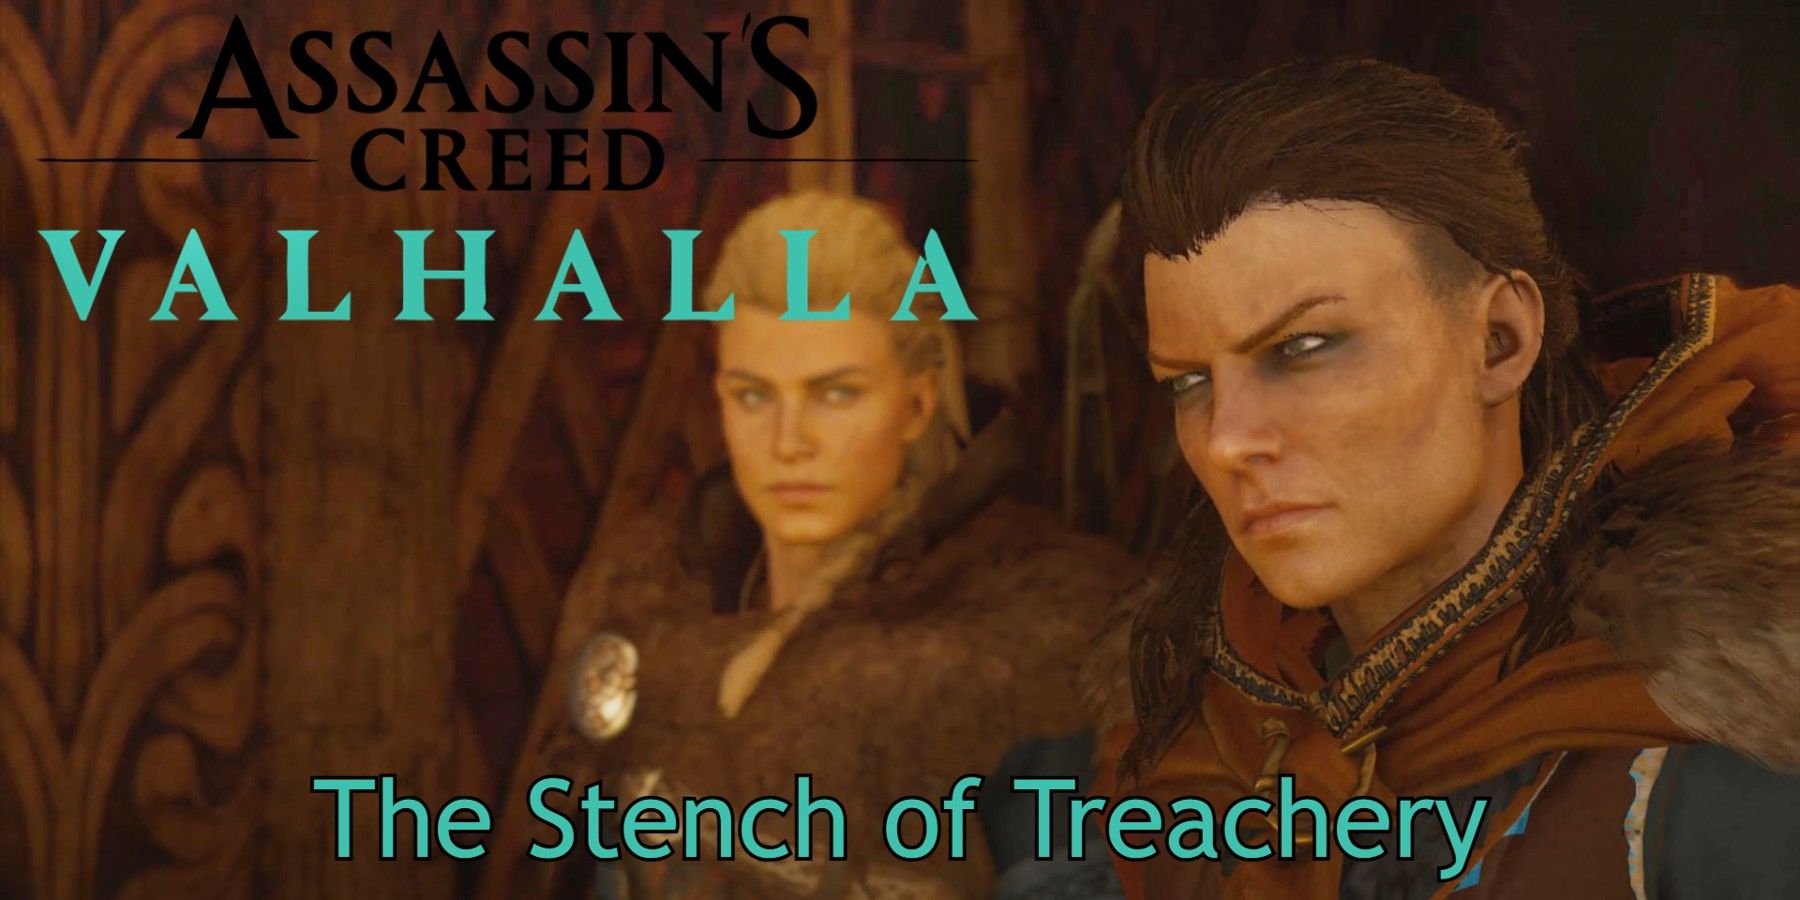 Assassin's Creed Valhalla - Soma's traitor: Who is the traitor in